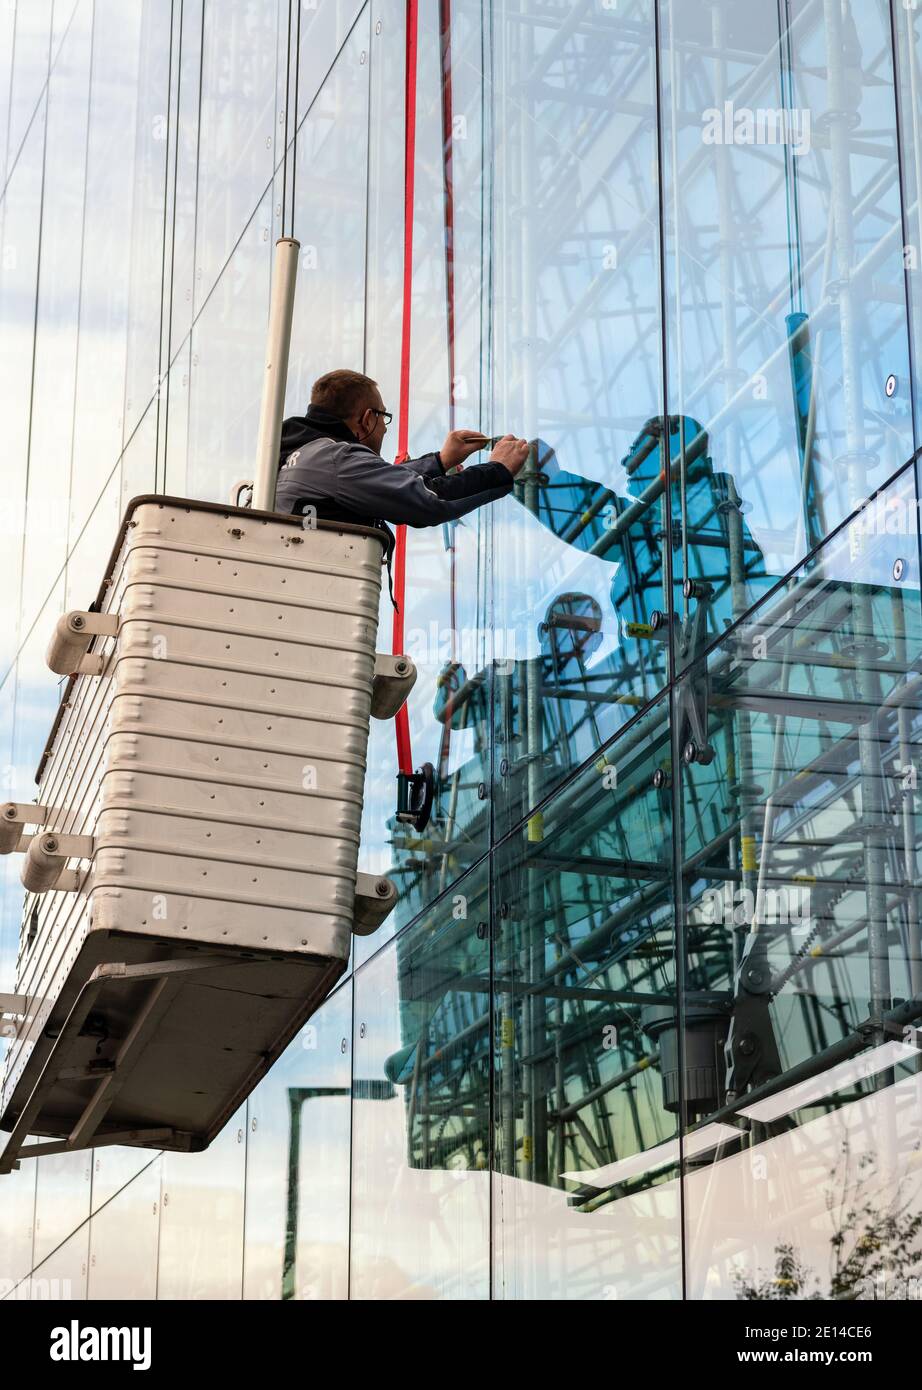 Craftsmen Repair The Pane At An Office Building Stock Photo